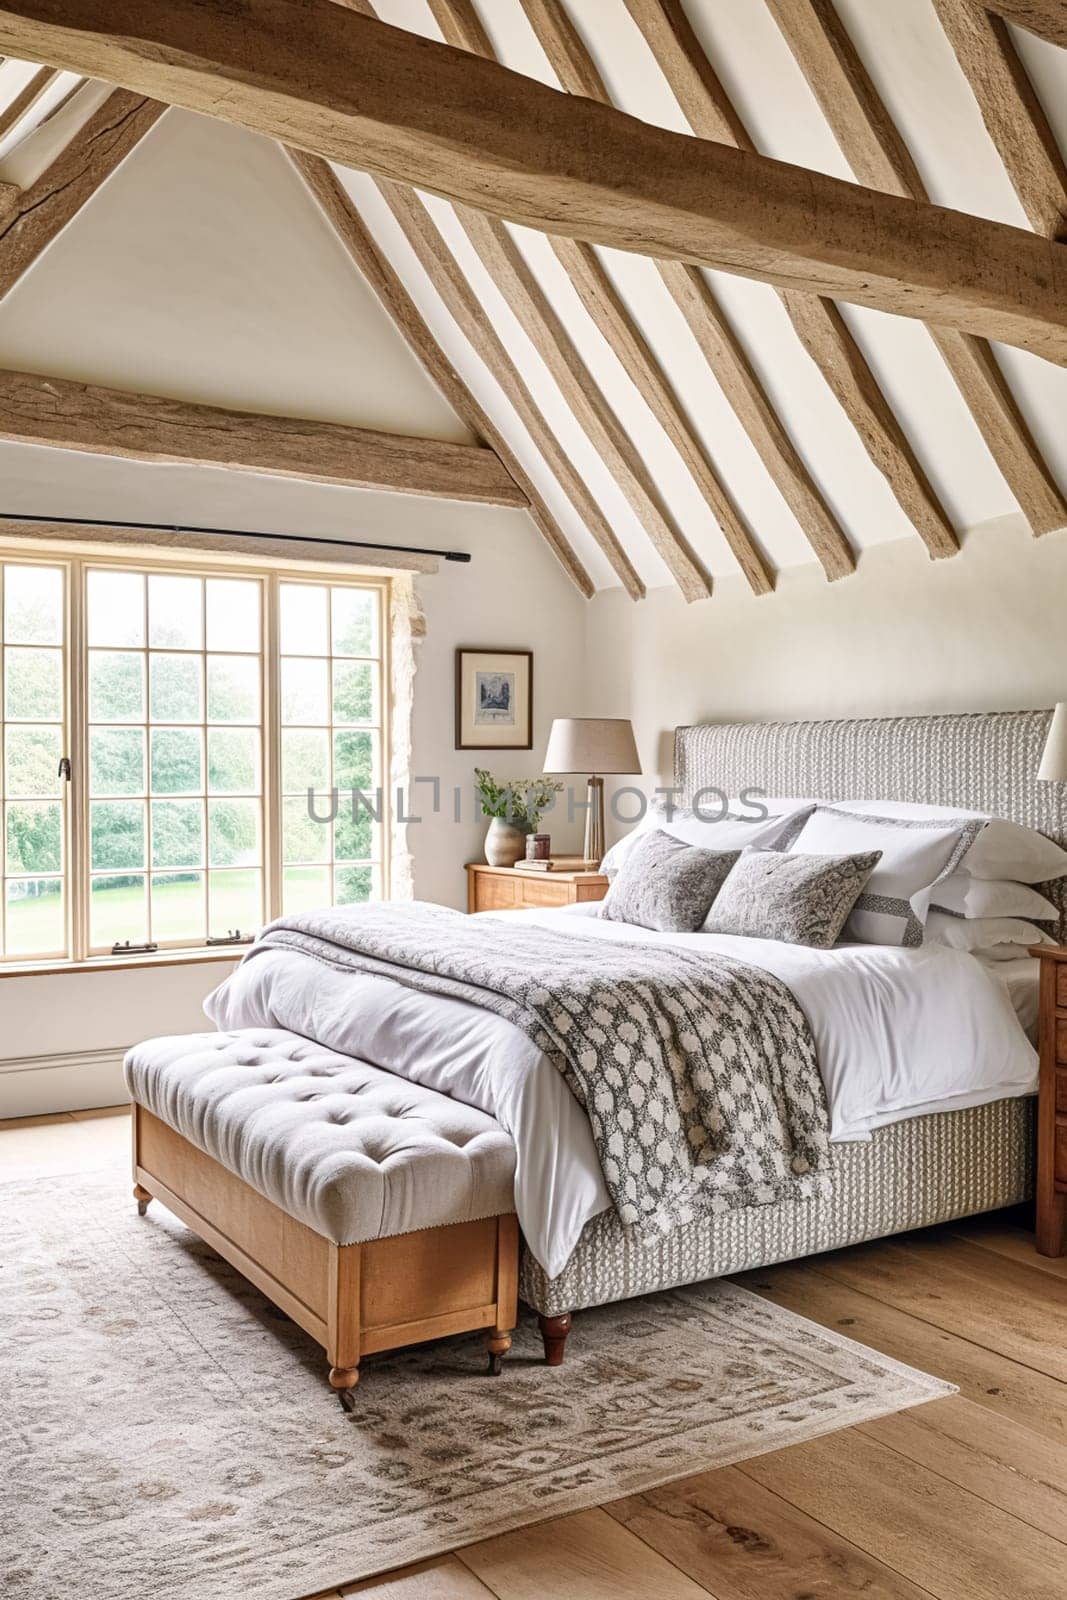 Cottage style bedroom decor, interior design and home decor, bed with elegant bedding and bespoke furniture, English country house or holiday rental interiors